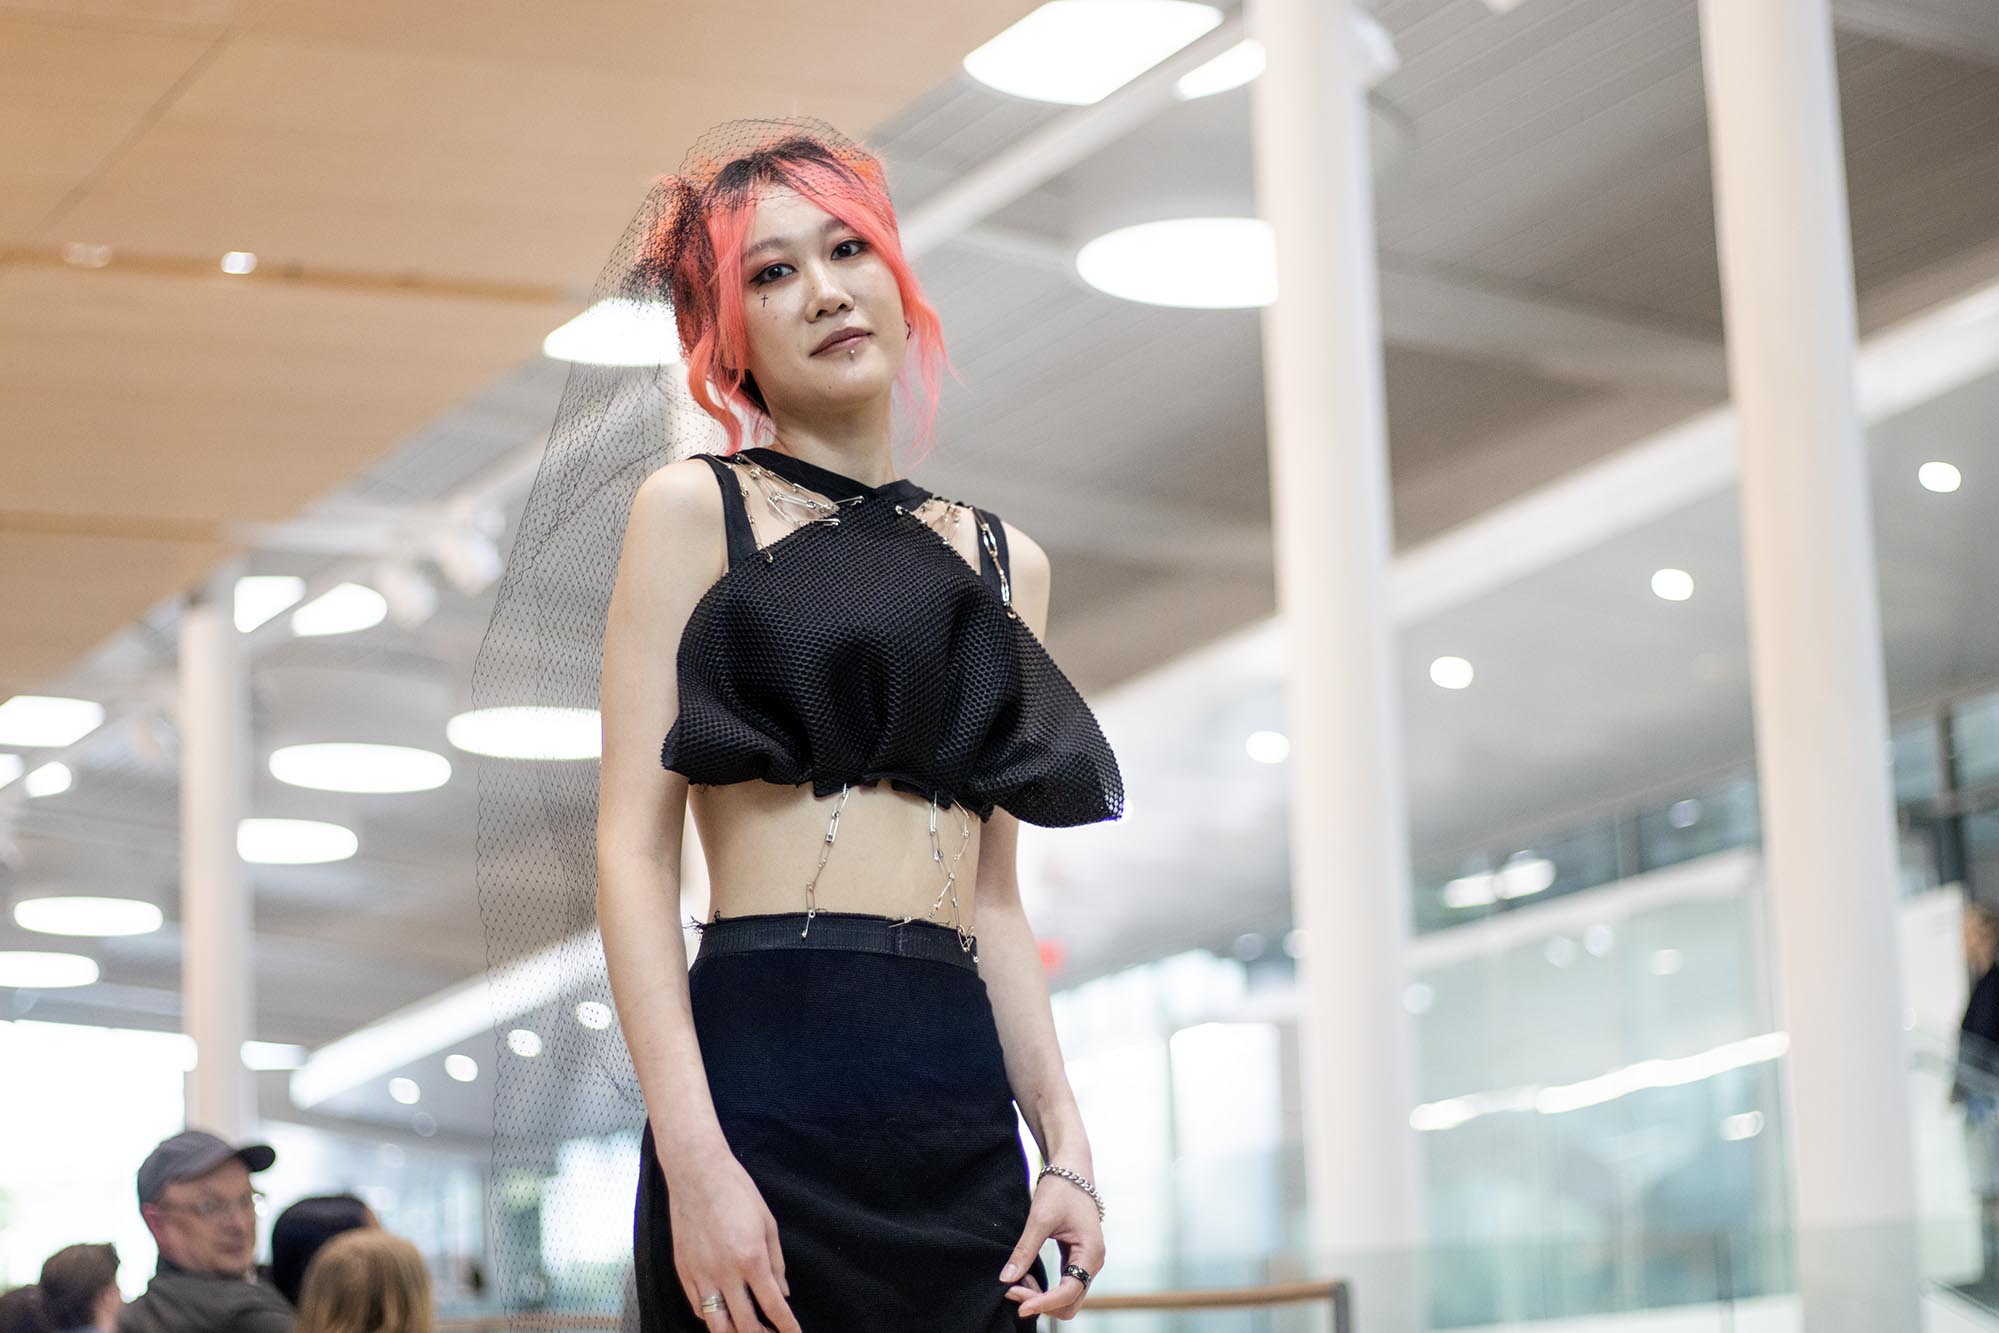 Re-Fashioned 2023. Model Vicky Ma wears a black cropped top and black bottom with metal adornments. She has pink hair and a black lace veil. Designers Alan Dong and Yi Liu.